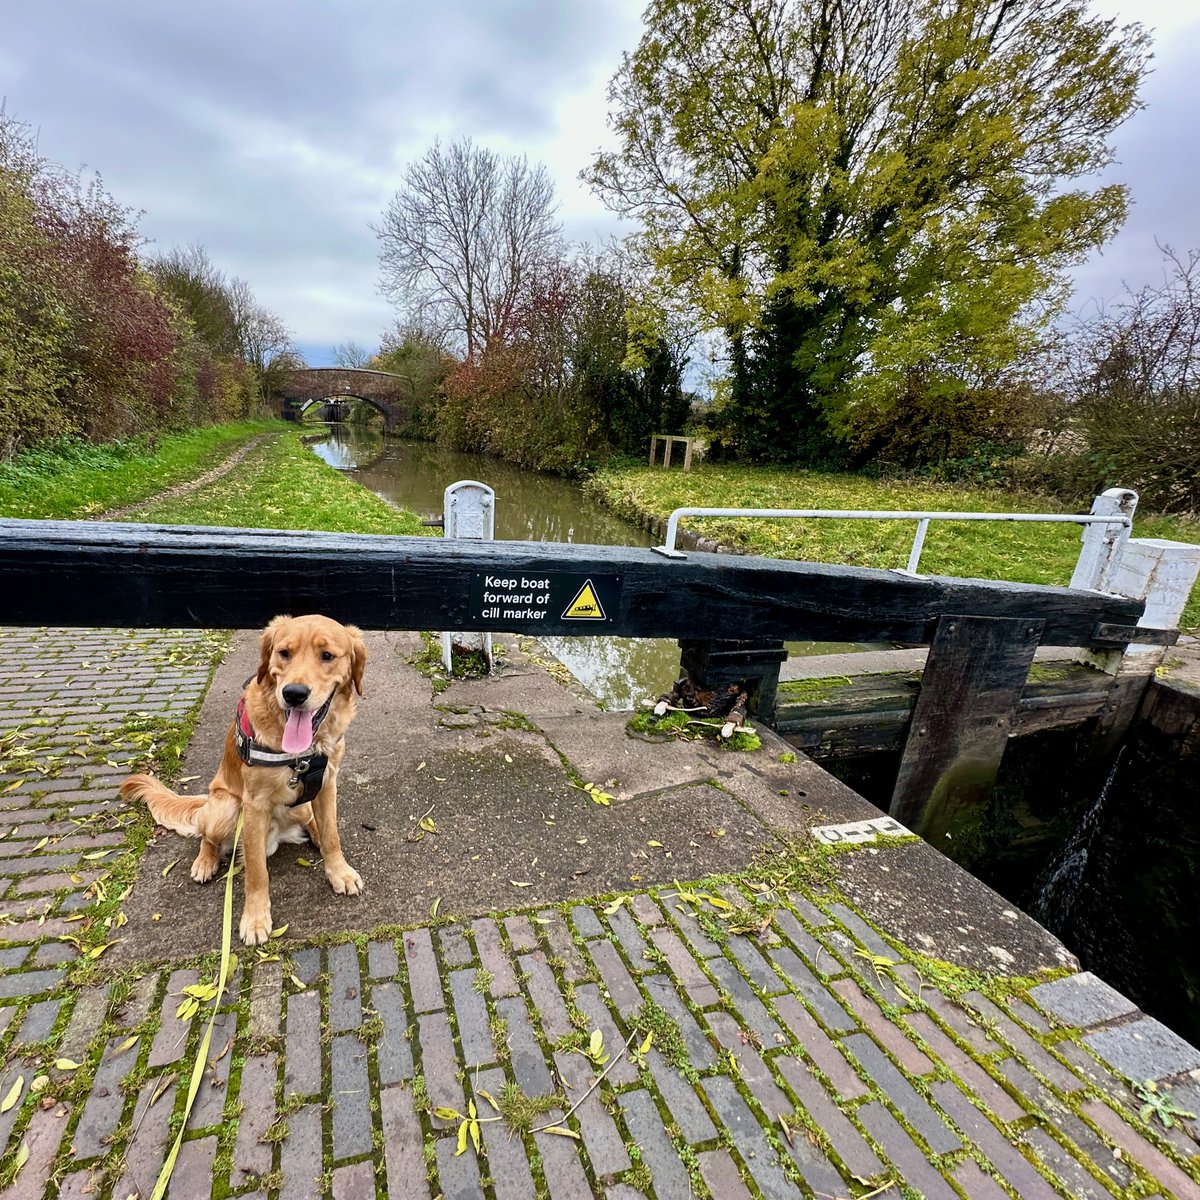 Today is Finlay's 1st birthday so happy 1st birthday #RedMoonshine :) he's enjoyed a walk along #CoventryCanal at lunchtime. #BoatsThatTweet #LifesBetterByWater #GoldenRetrievers #FirstBirthday #KeepCanalsAlive #AtherstoneLocks